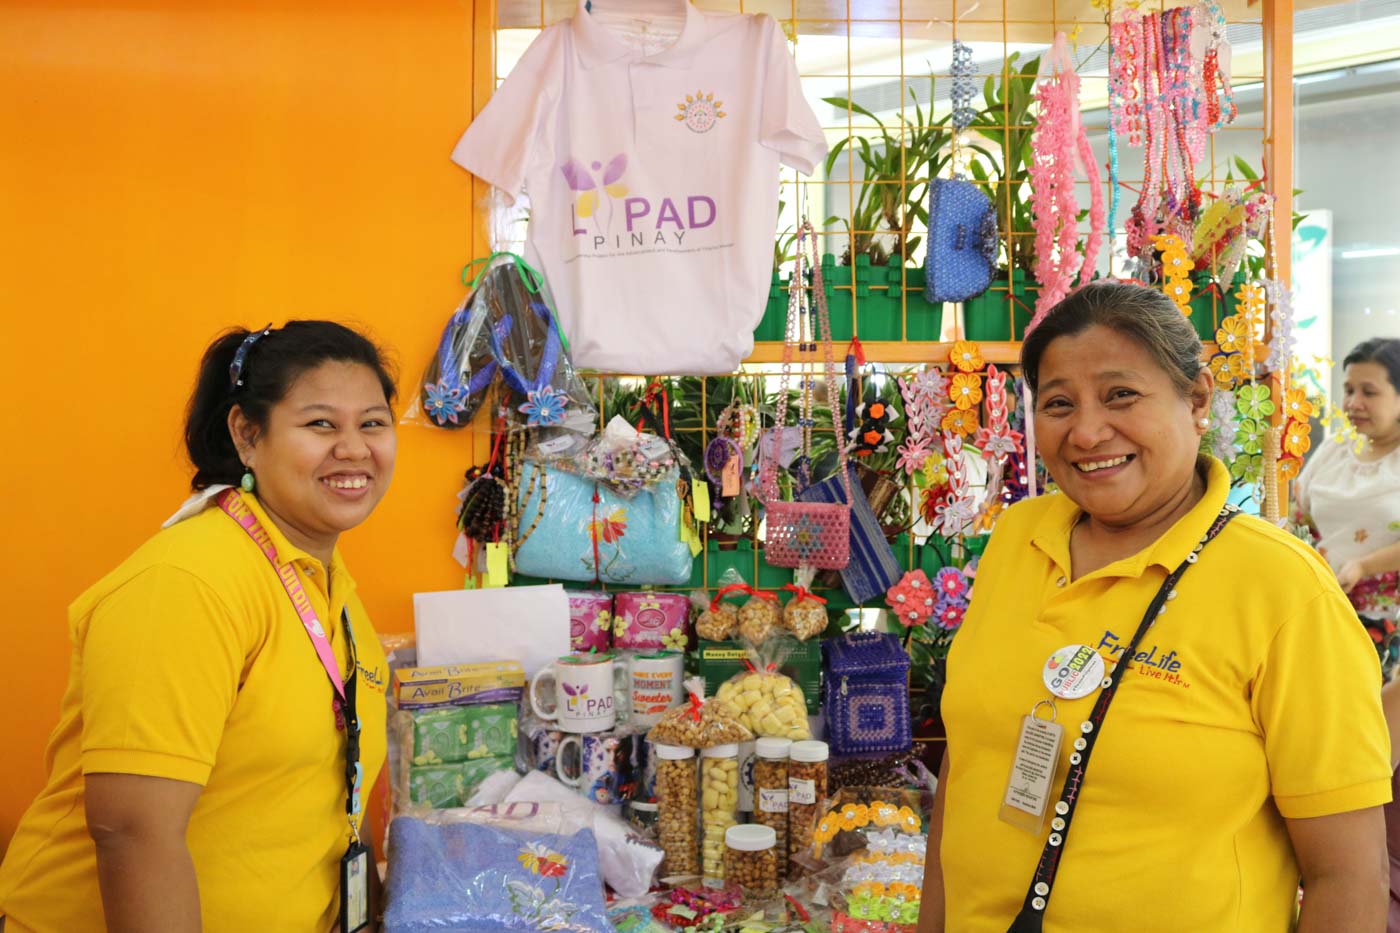 PRIDE. Beneficiaries of the LIPAD Pinay program proudly selling their merchandise at the Likhang Lokal bazaar in Gateway Mall on June 13, 2019. Photos by Arlan Jay Jondonero/Rappler 